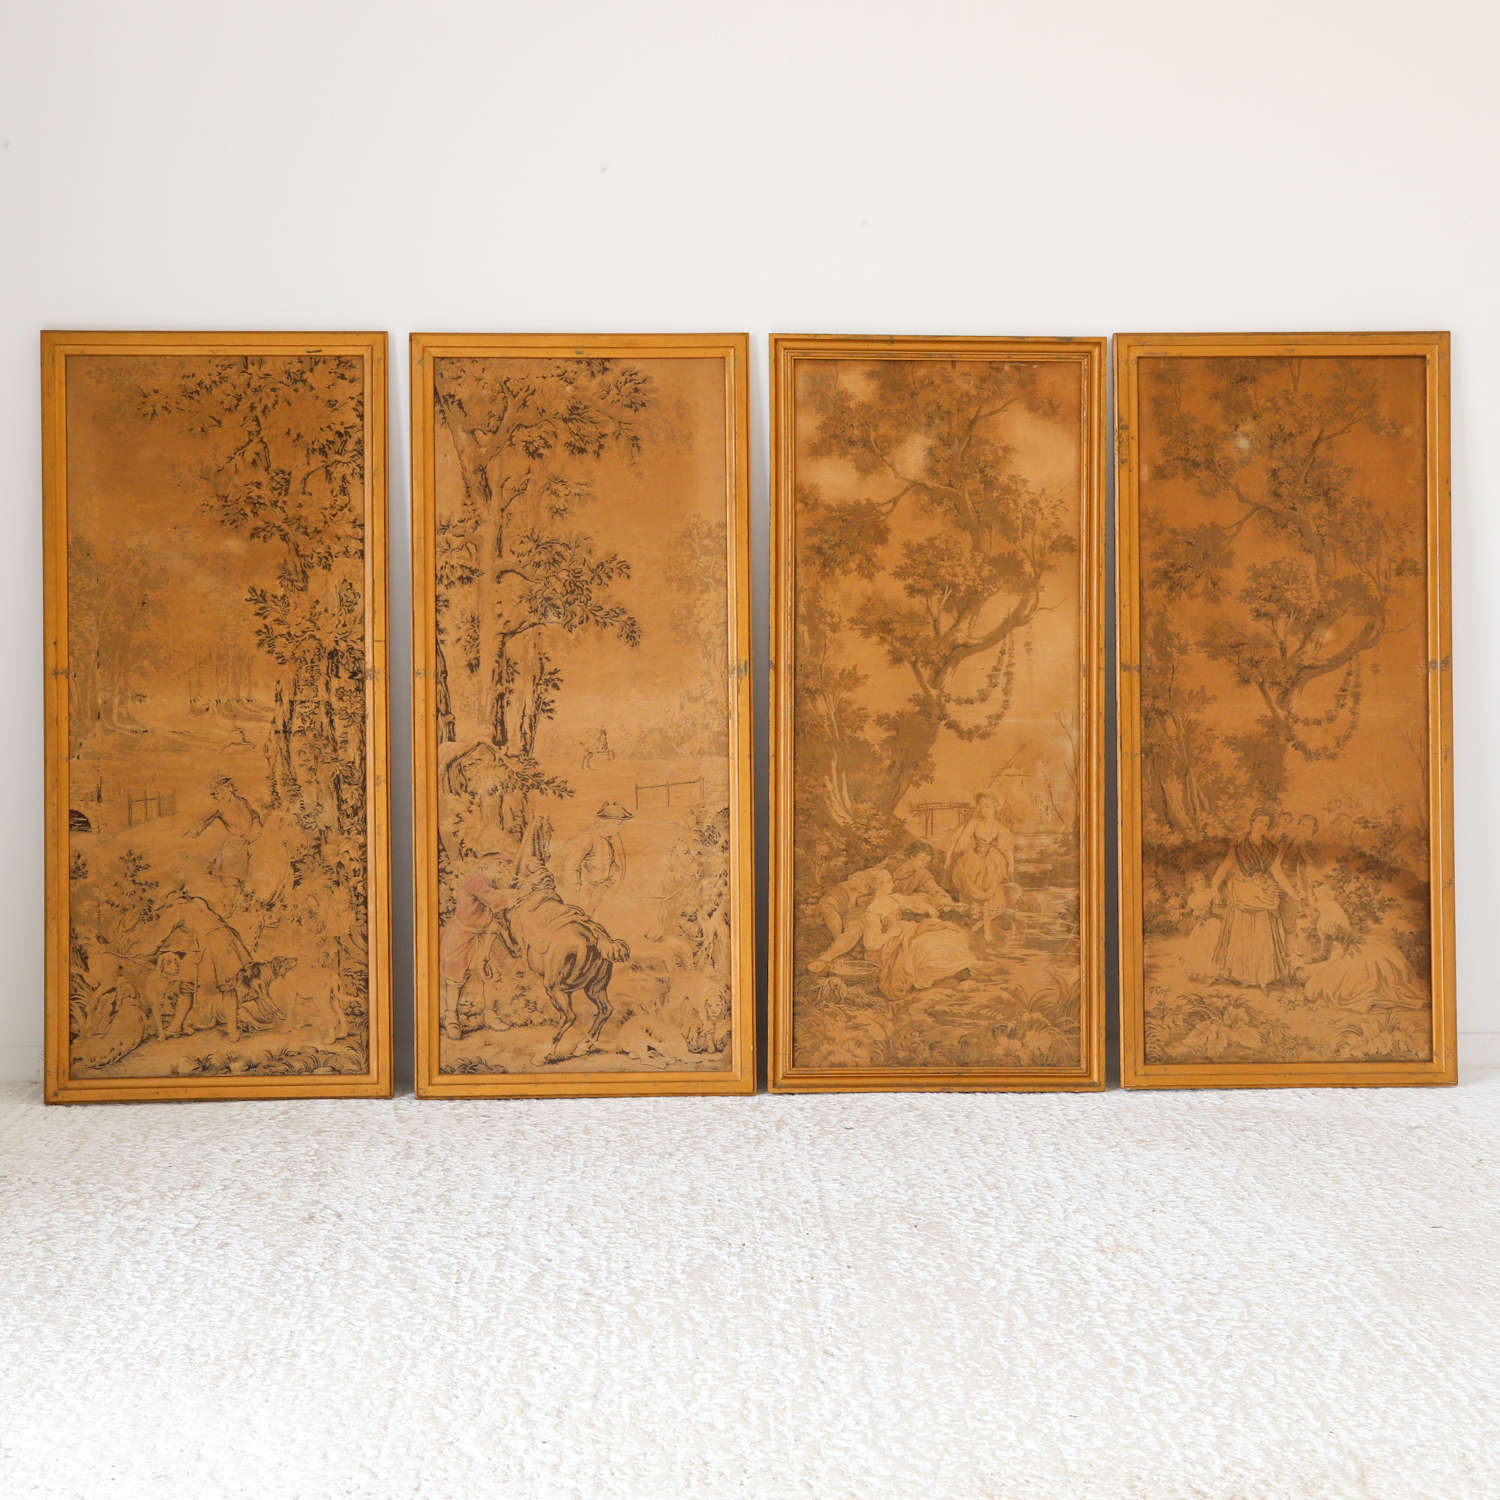 Set of 4 Framed Tapestry Wall Panels c 1920 Sepia Tone on Gold